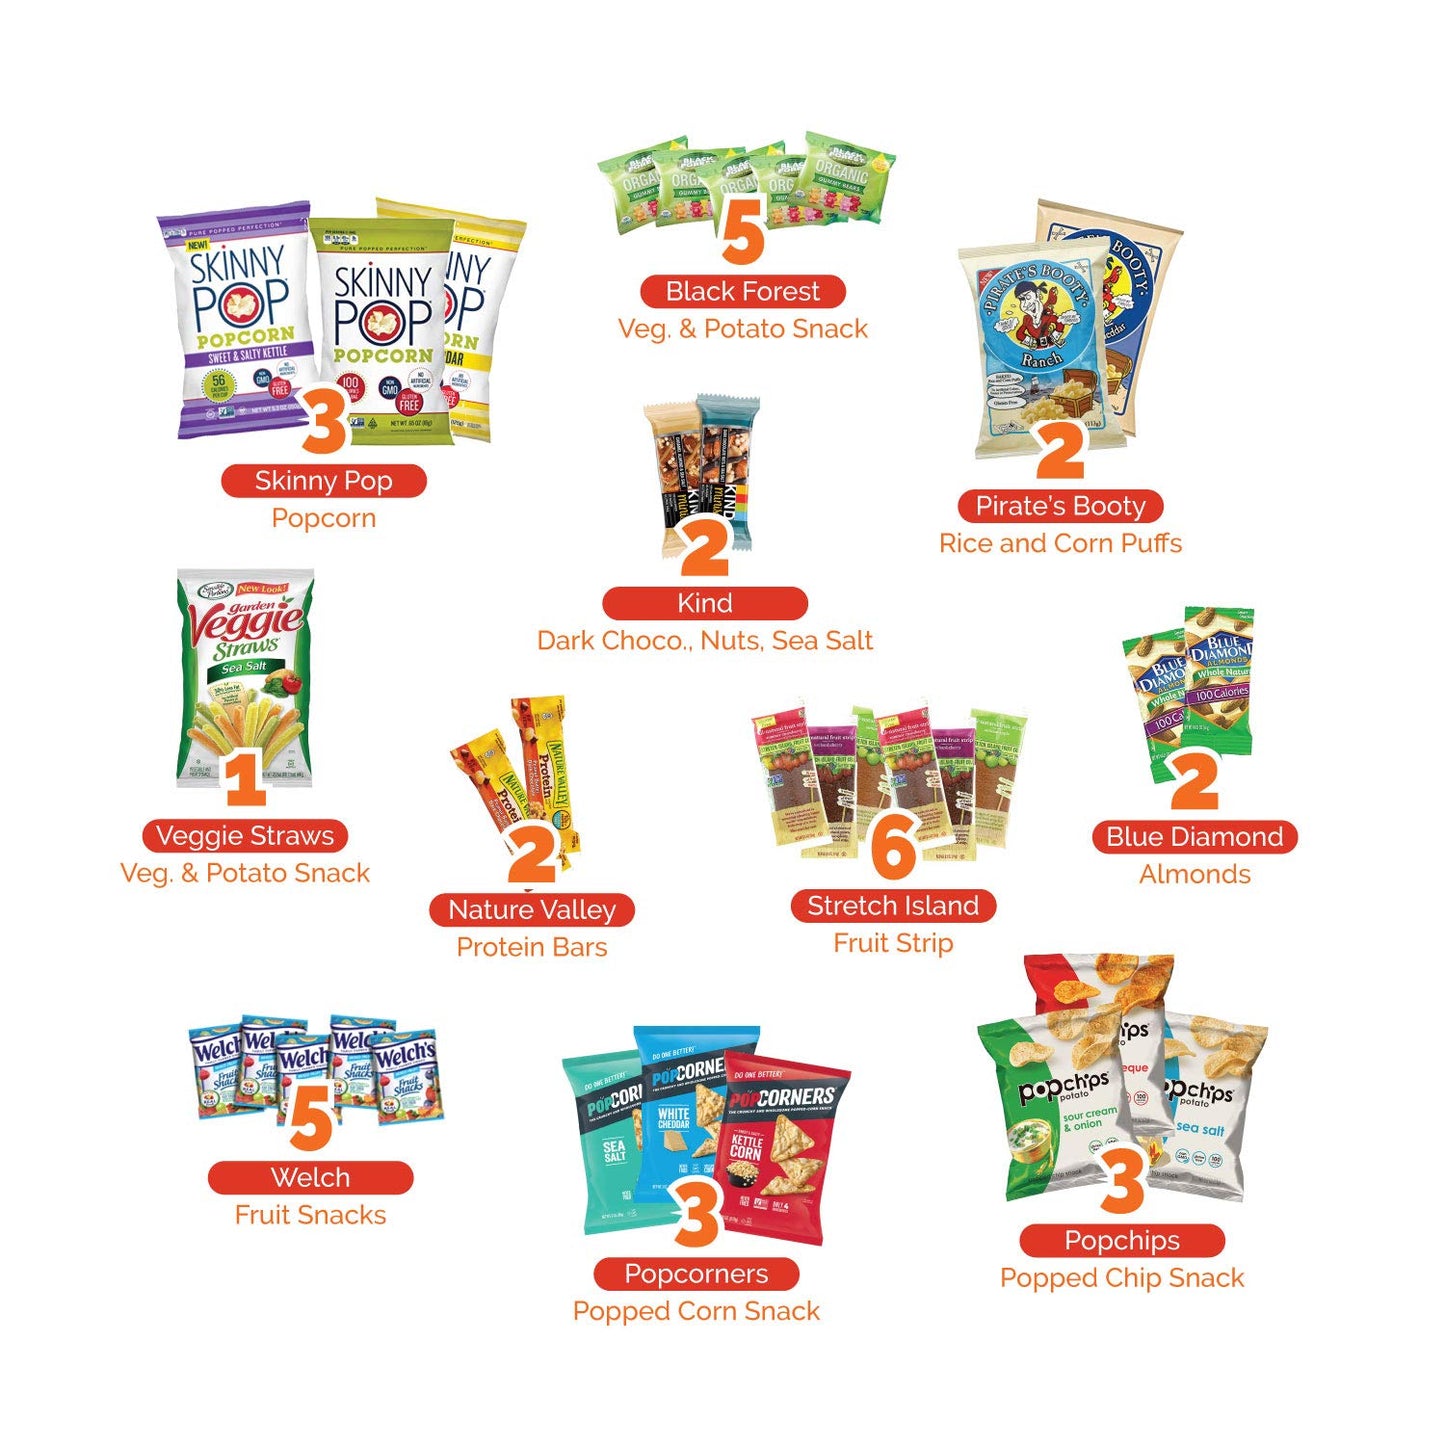 Snack Box Gluten Free Healthy Snacks Care Package (34 Count) for College Students, Exams, Father's Day, Military, Finals, Office and Gift Ideas. Chips, Popcorn, and granola Bars.